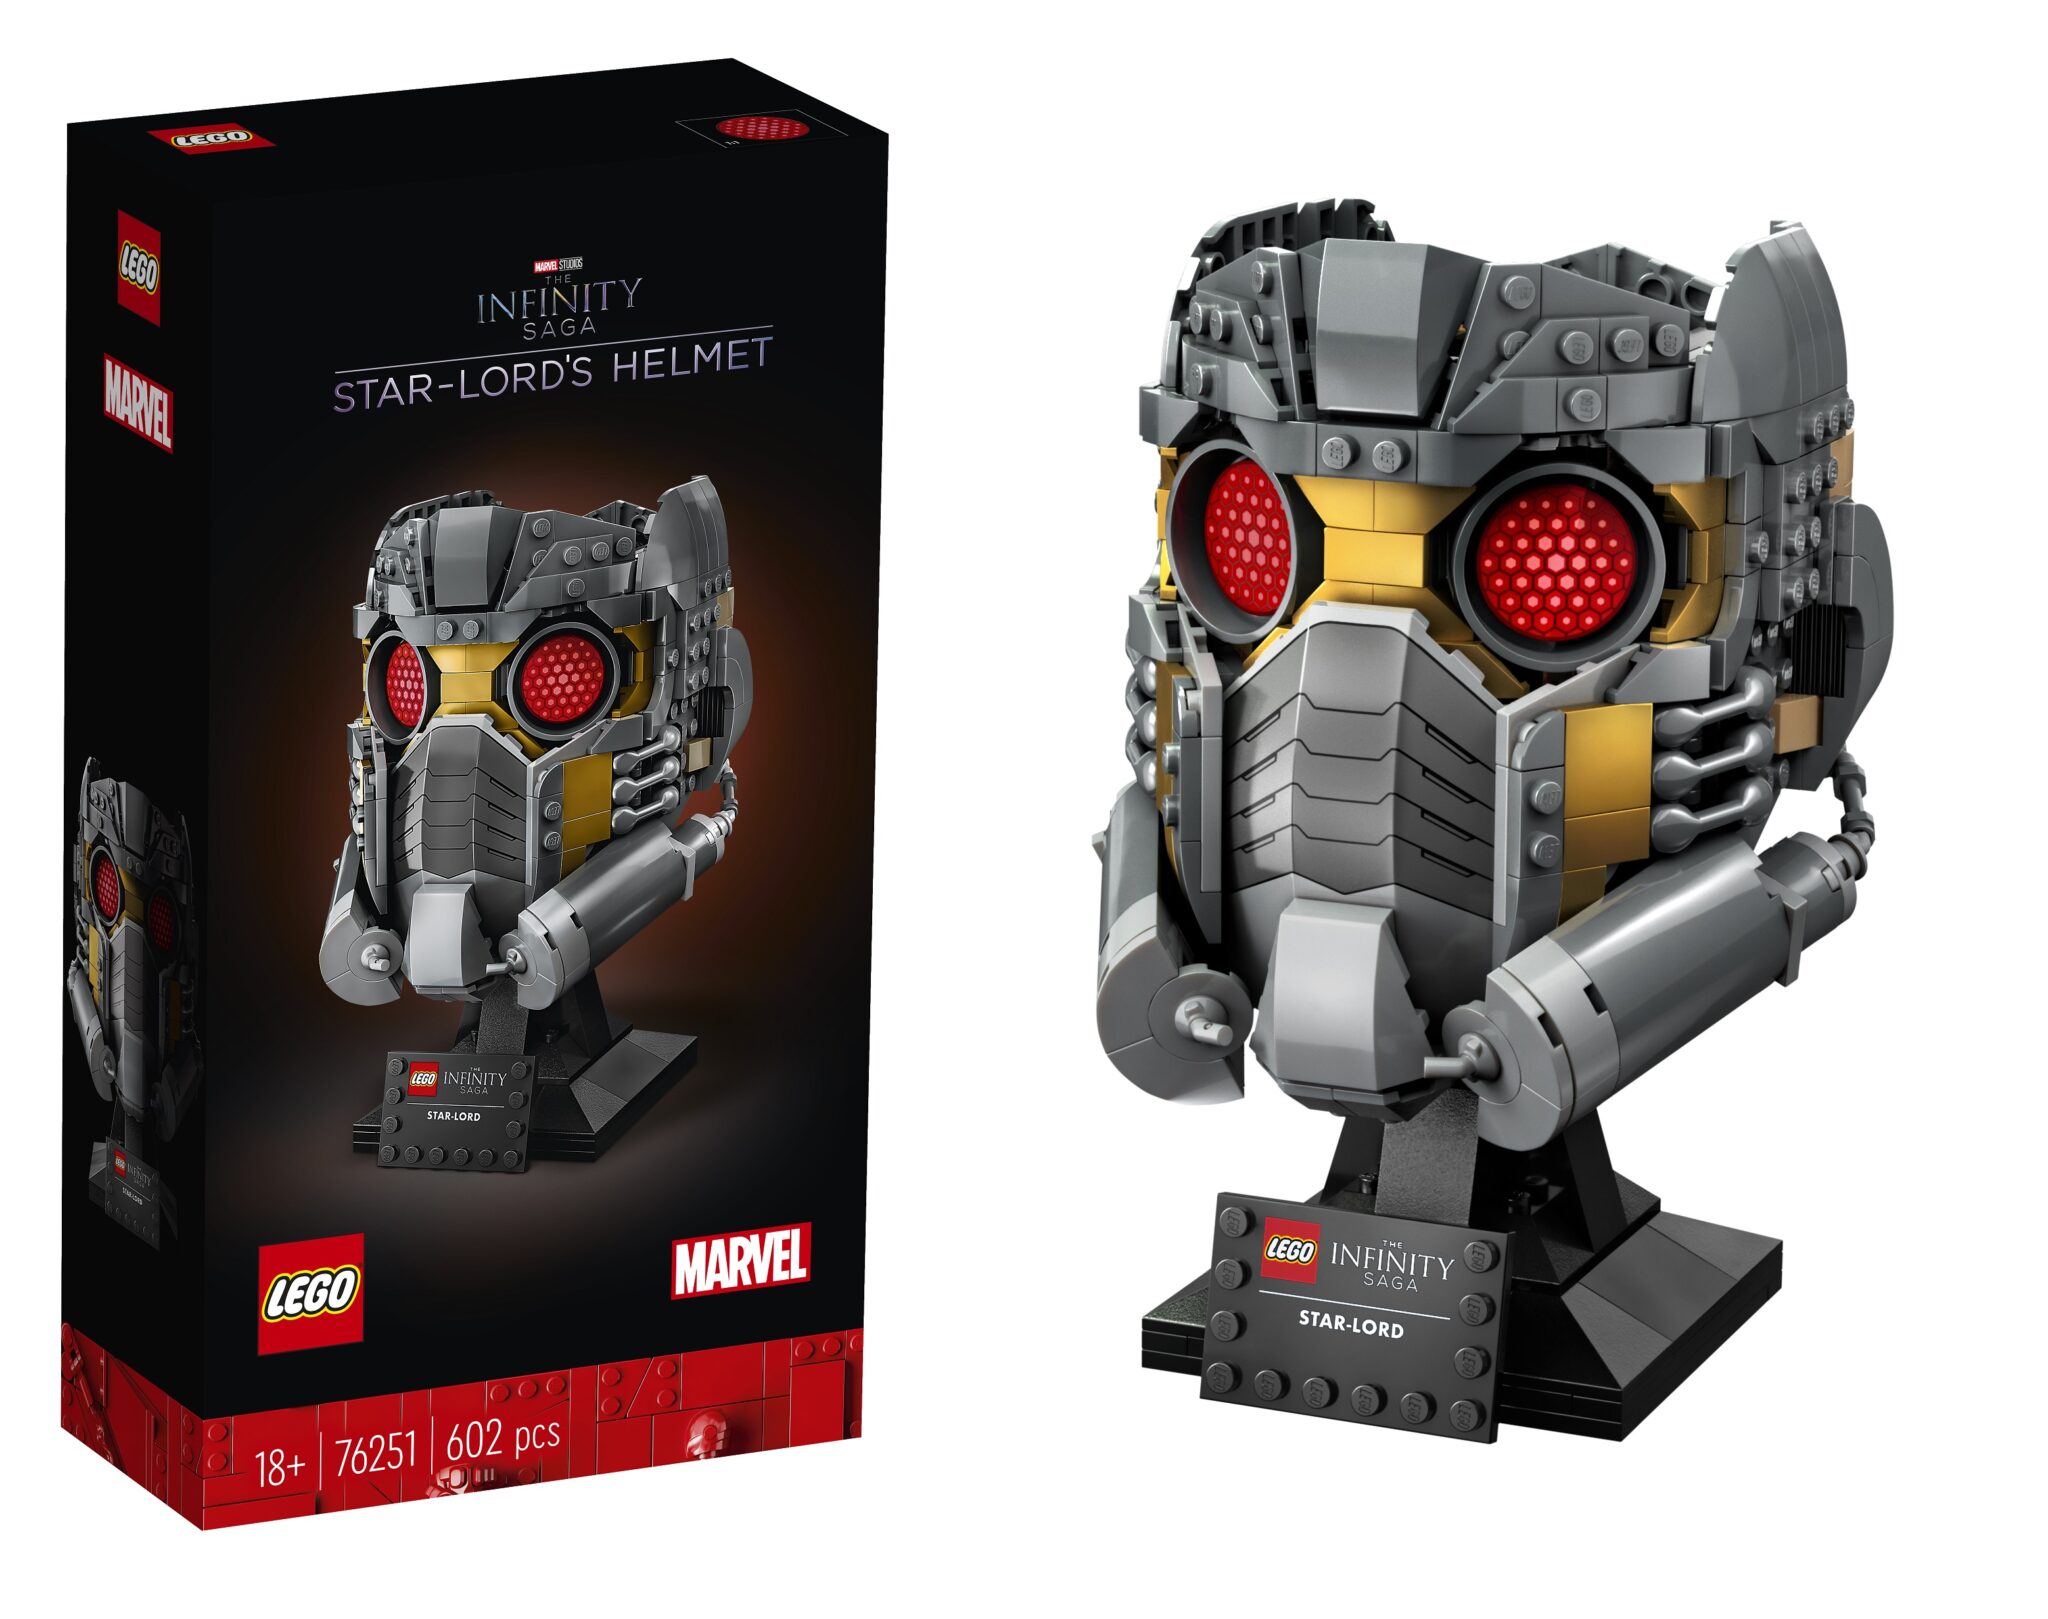 LEGO released a Guardians of the Galaxy Helmet, the Star-Lord!